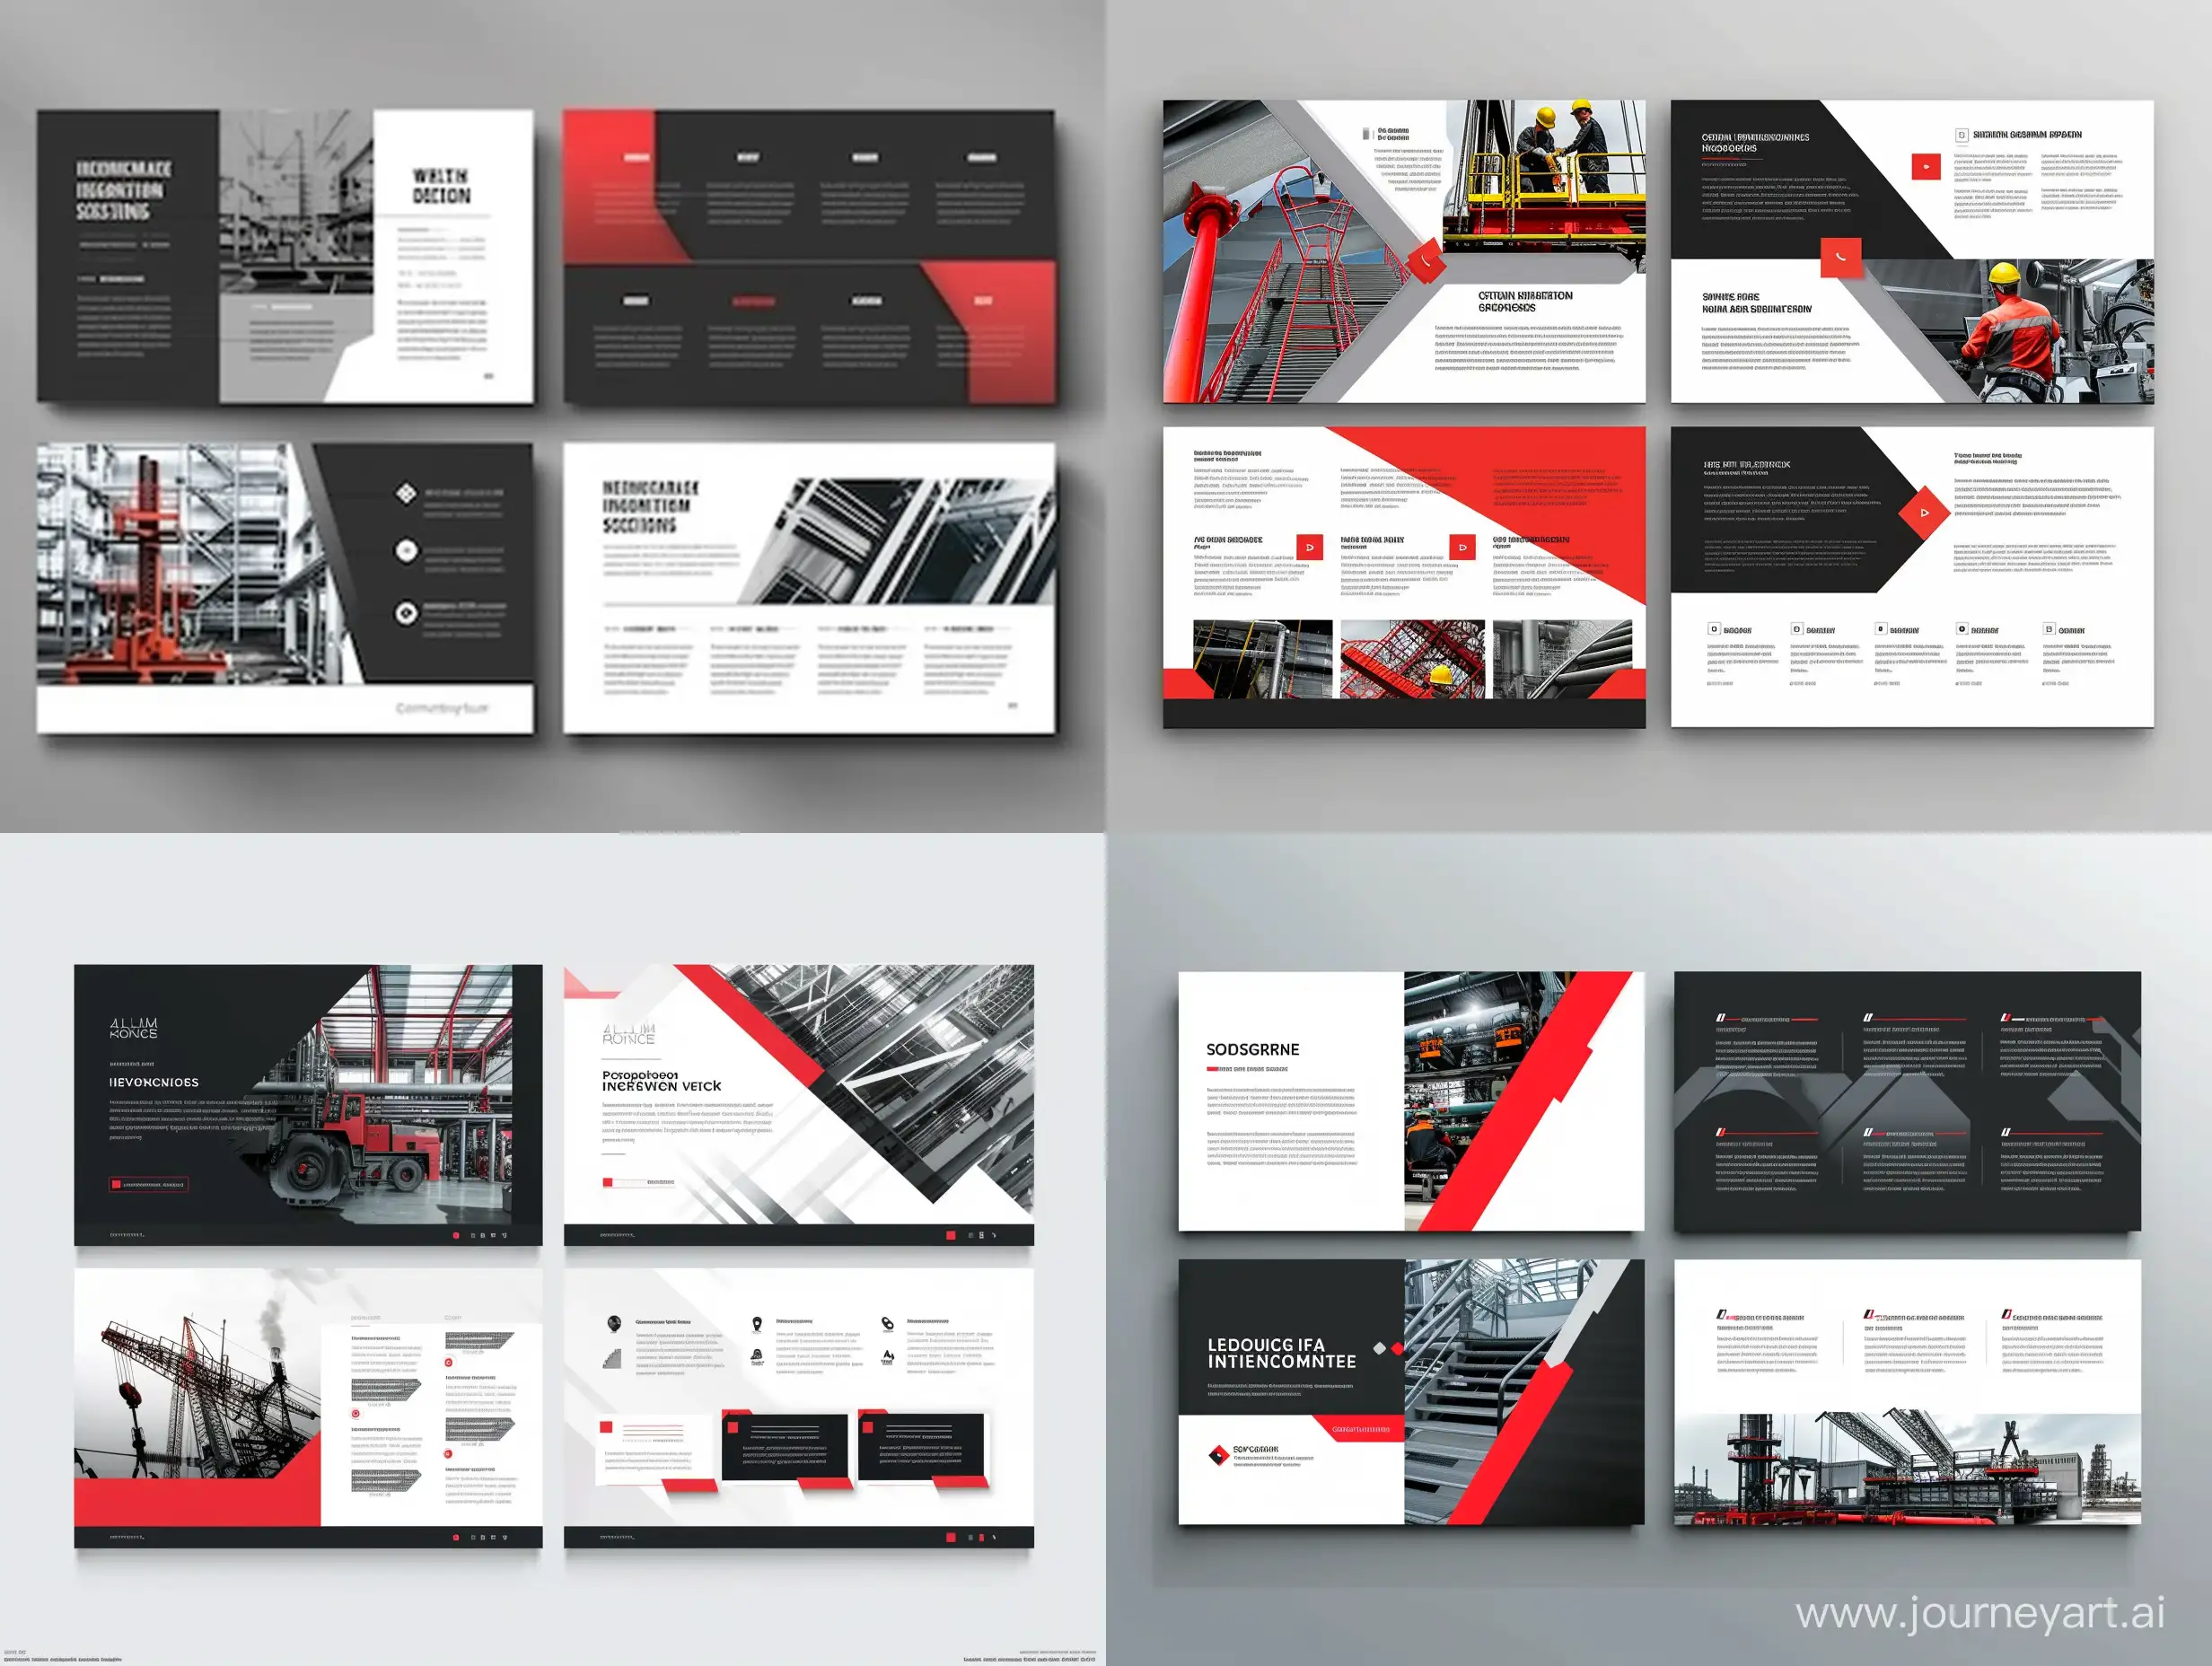 Dynamic-Engineering-Presentation-Slides-in-Monochrome-and-Red-Palette